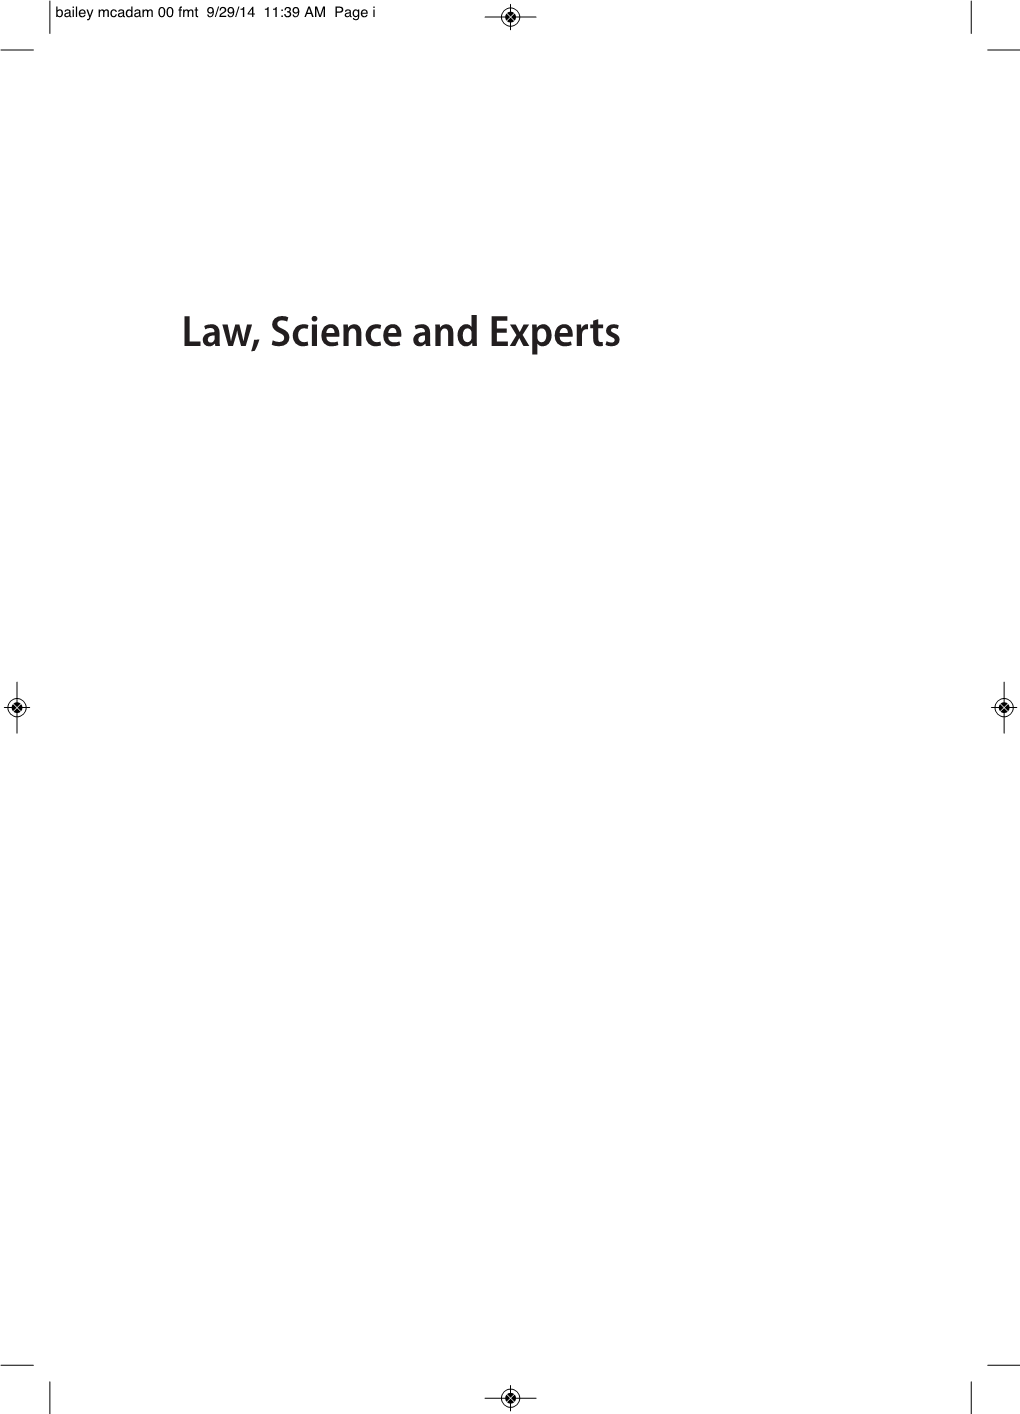 Law, Science and Experts Bailey Mcadam 00 Fmt 9/29/14 11:39 AM Page Ii Bailey Mcadam 00 Fmt 9/29/14 11:39 AM Page Iii